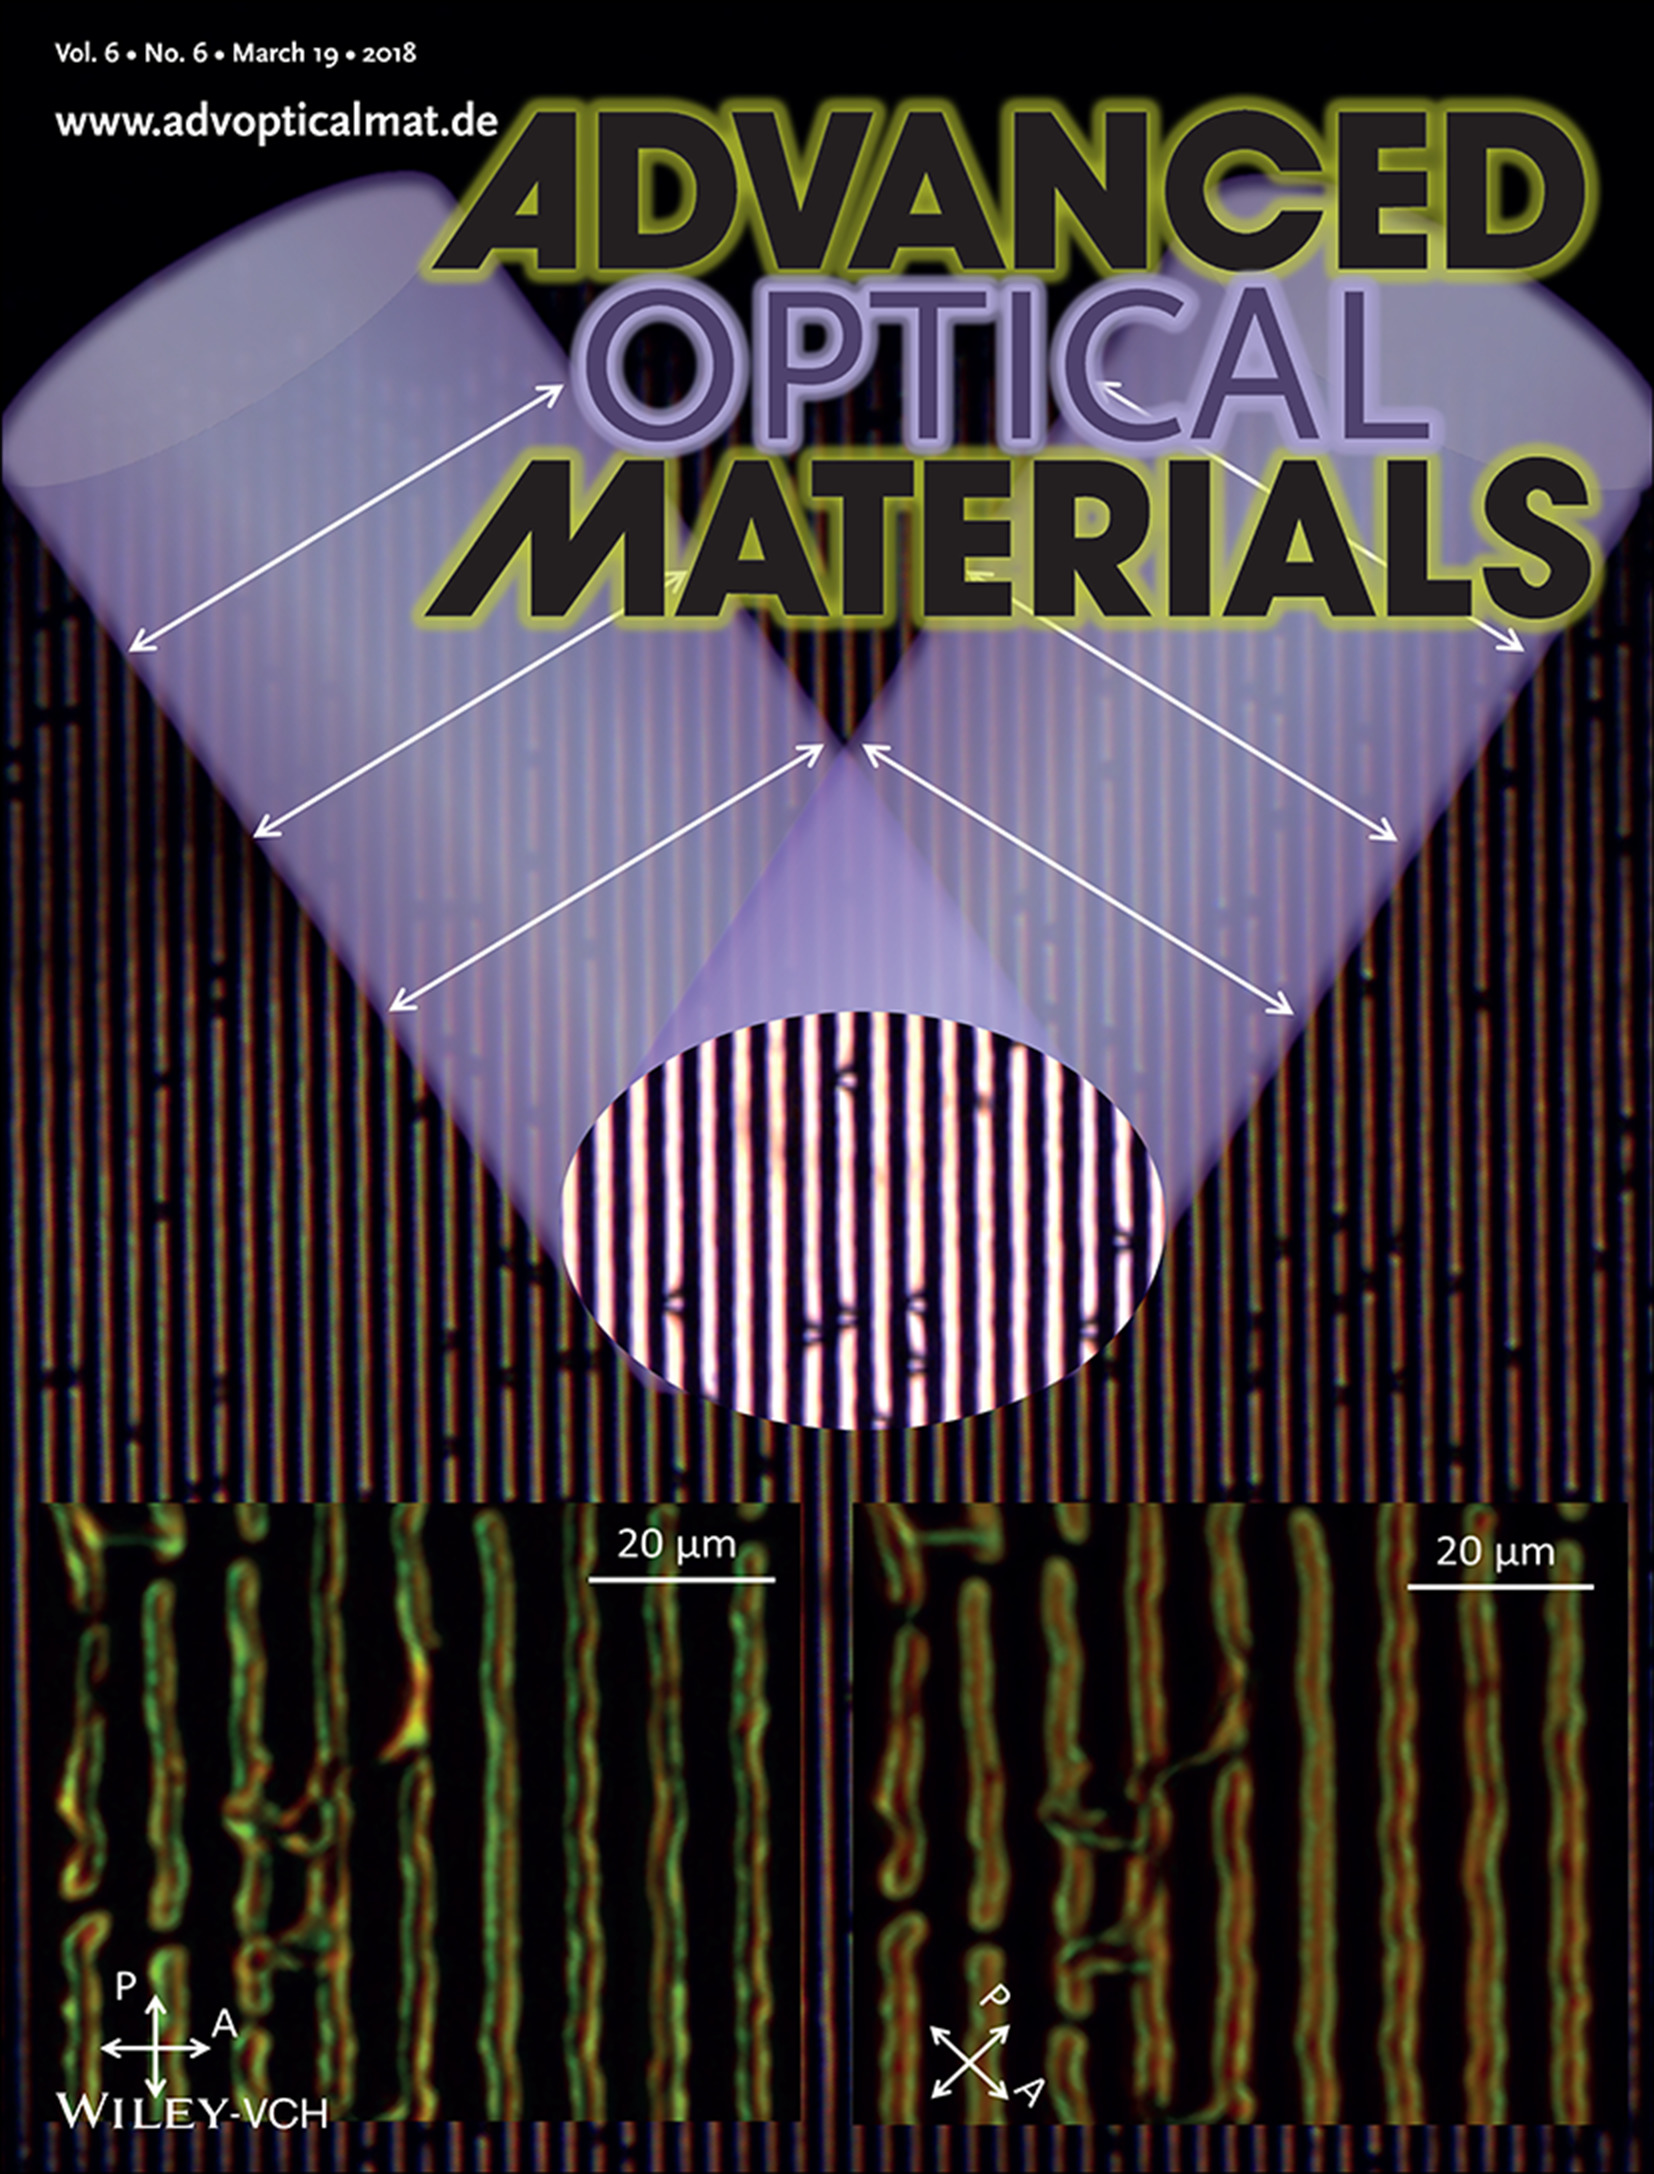 Back cover of March 2018 issue of Advanced Optical Materials